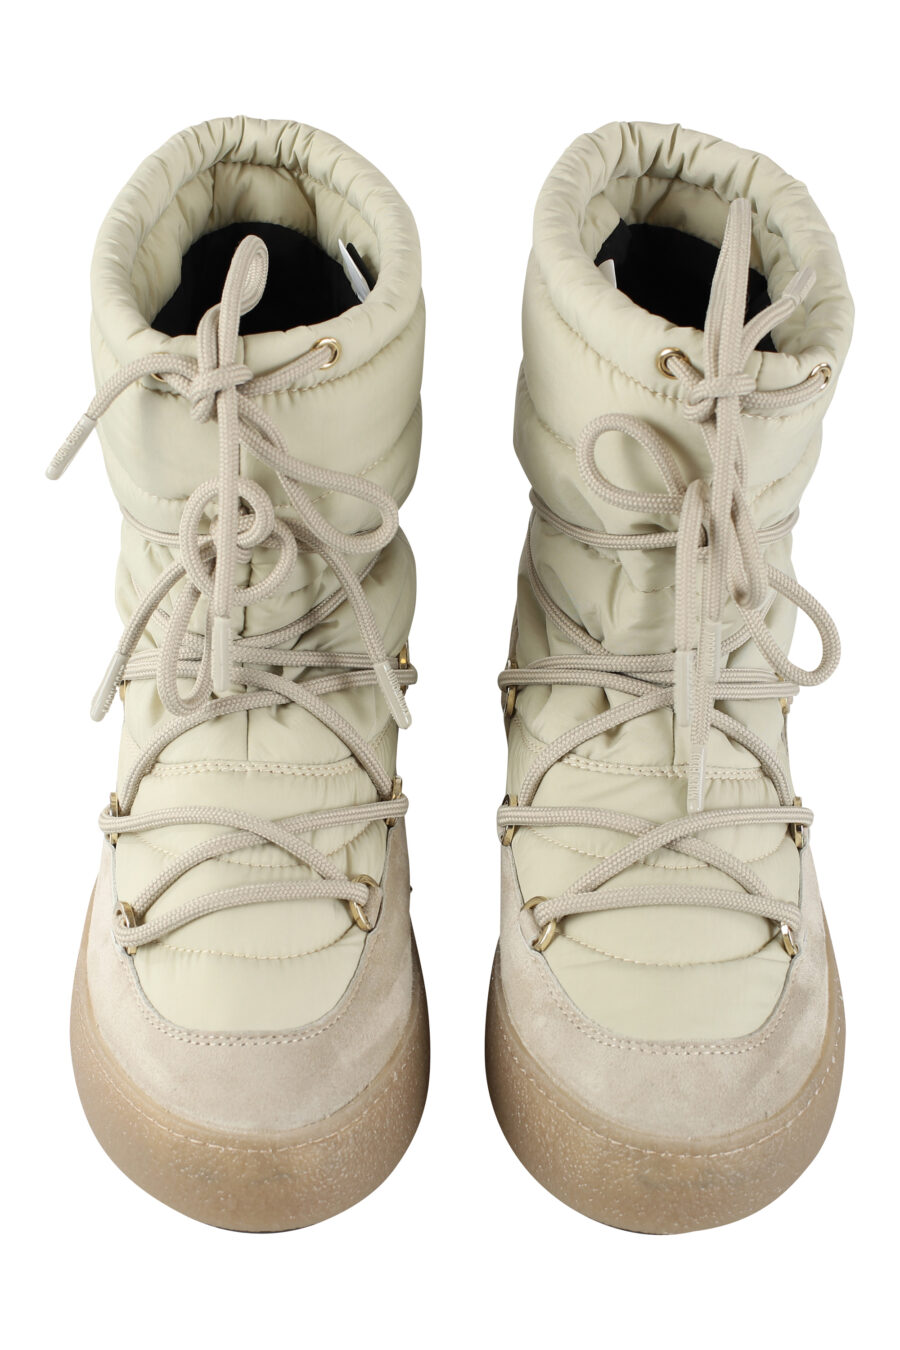 Sand coloured short snow boots with logo - IMG 9628